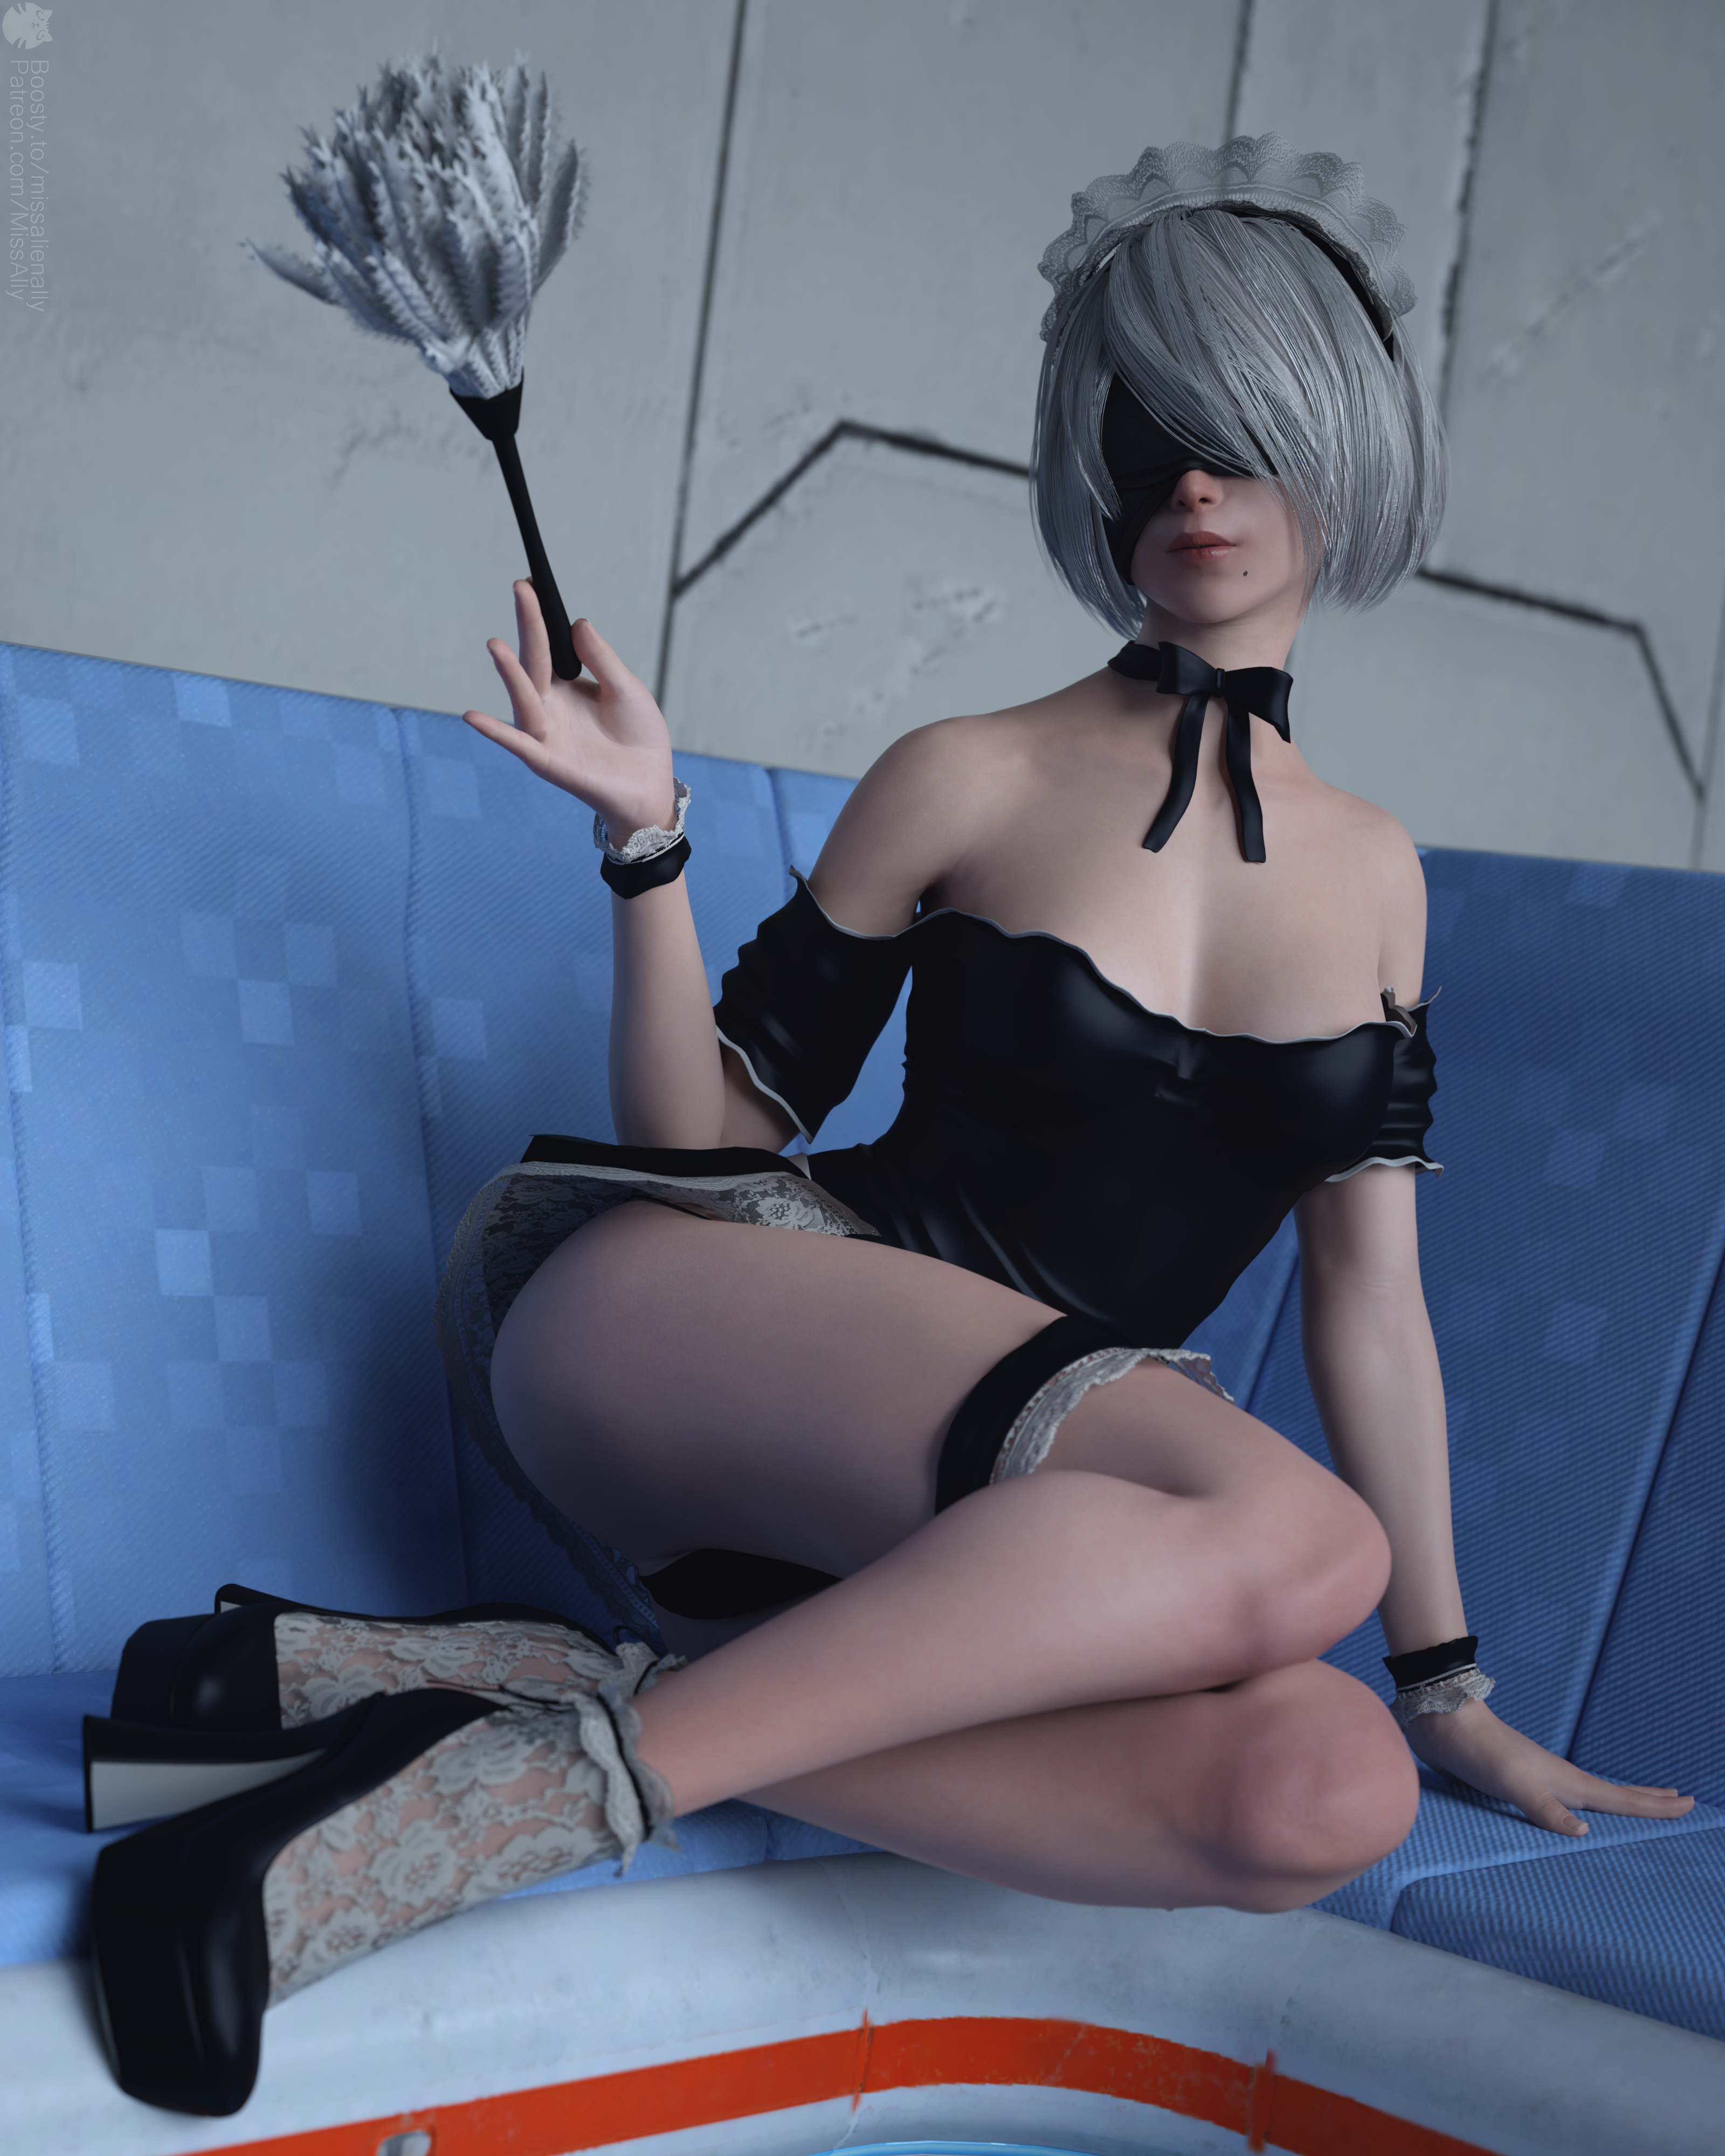 General 3200x4000 2B (Nier: Automata) Nier: Automata video games video game characters video game girls maid maid outfit CGI fan art artwork digital art Miss Ally portrait display blindfold choker heels duster